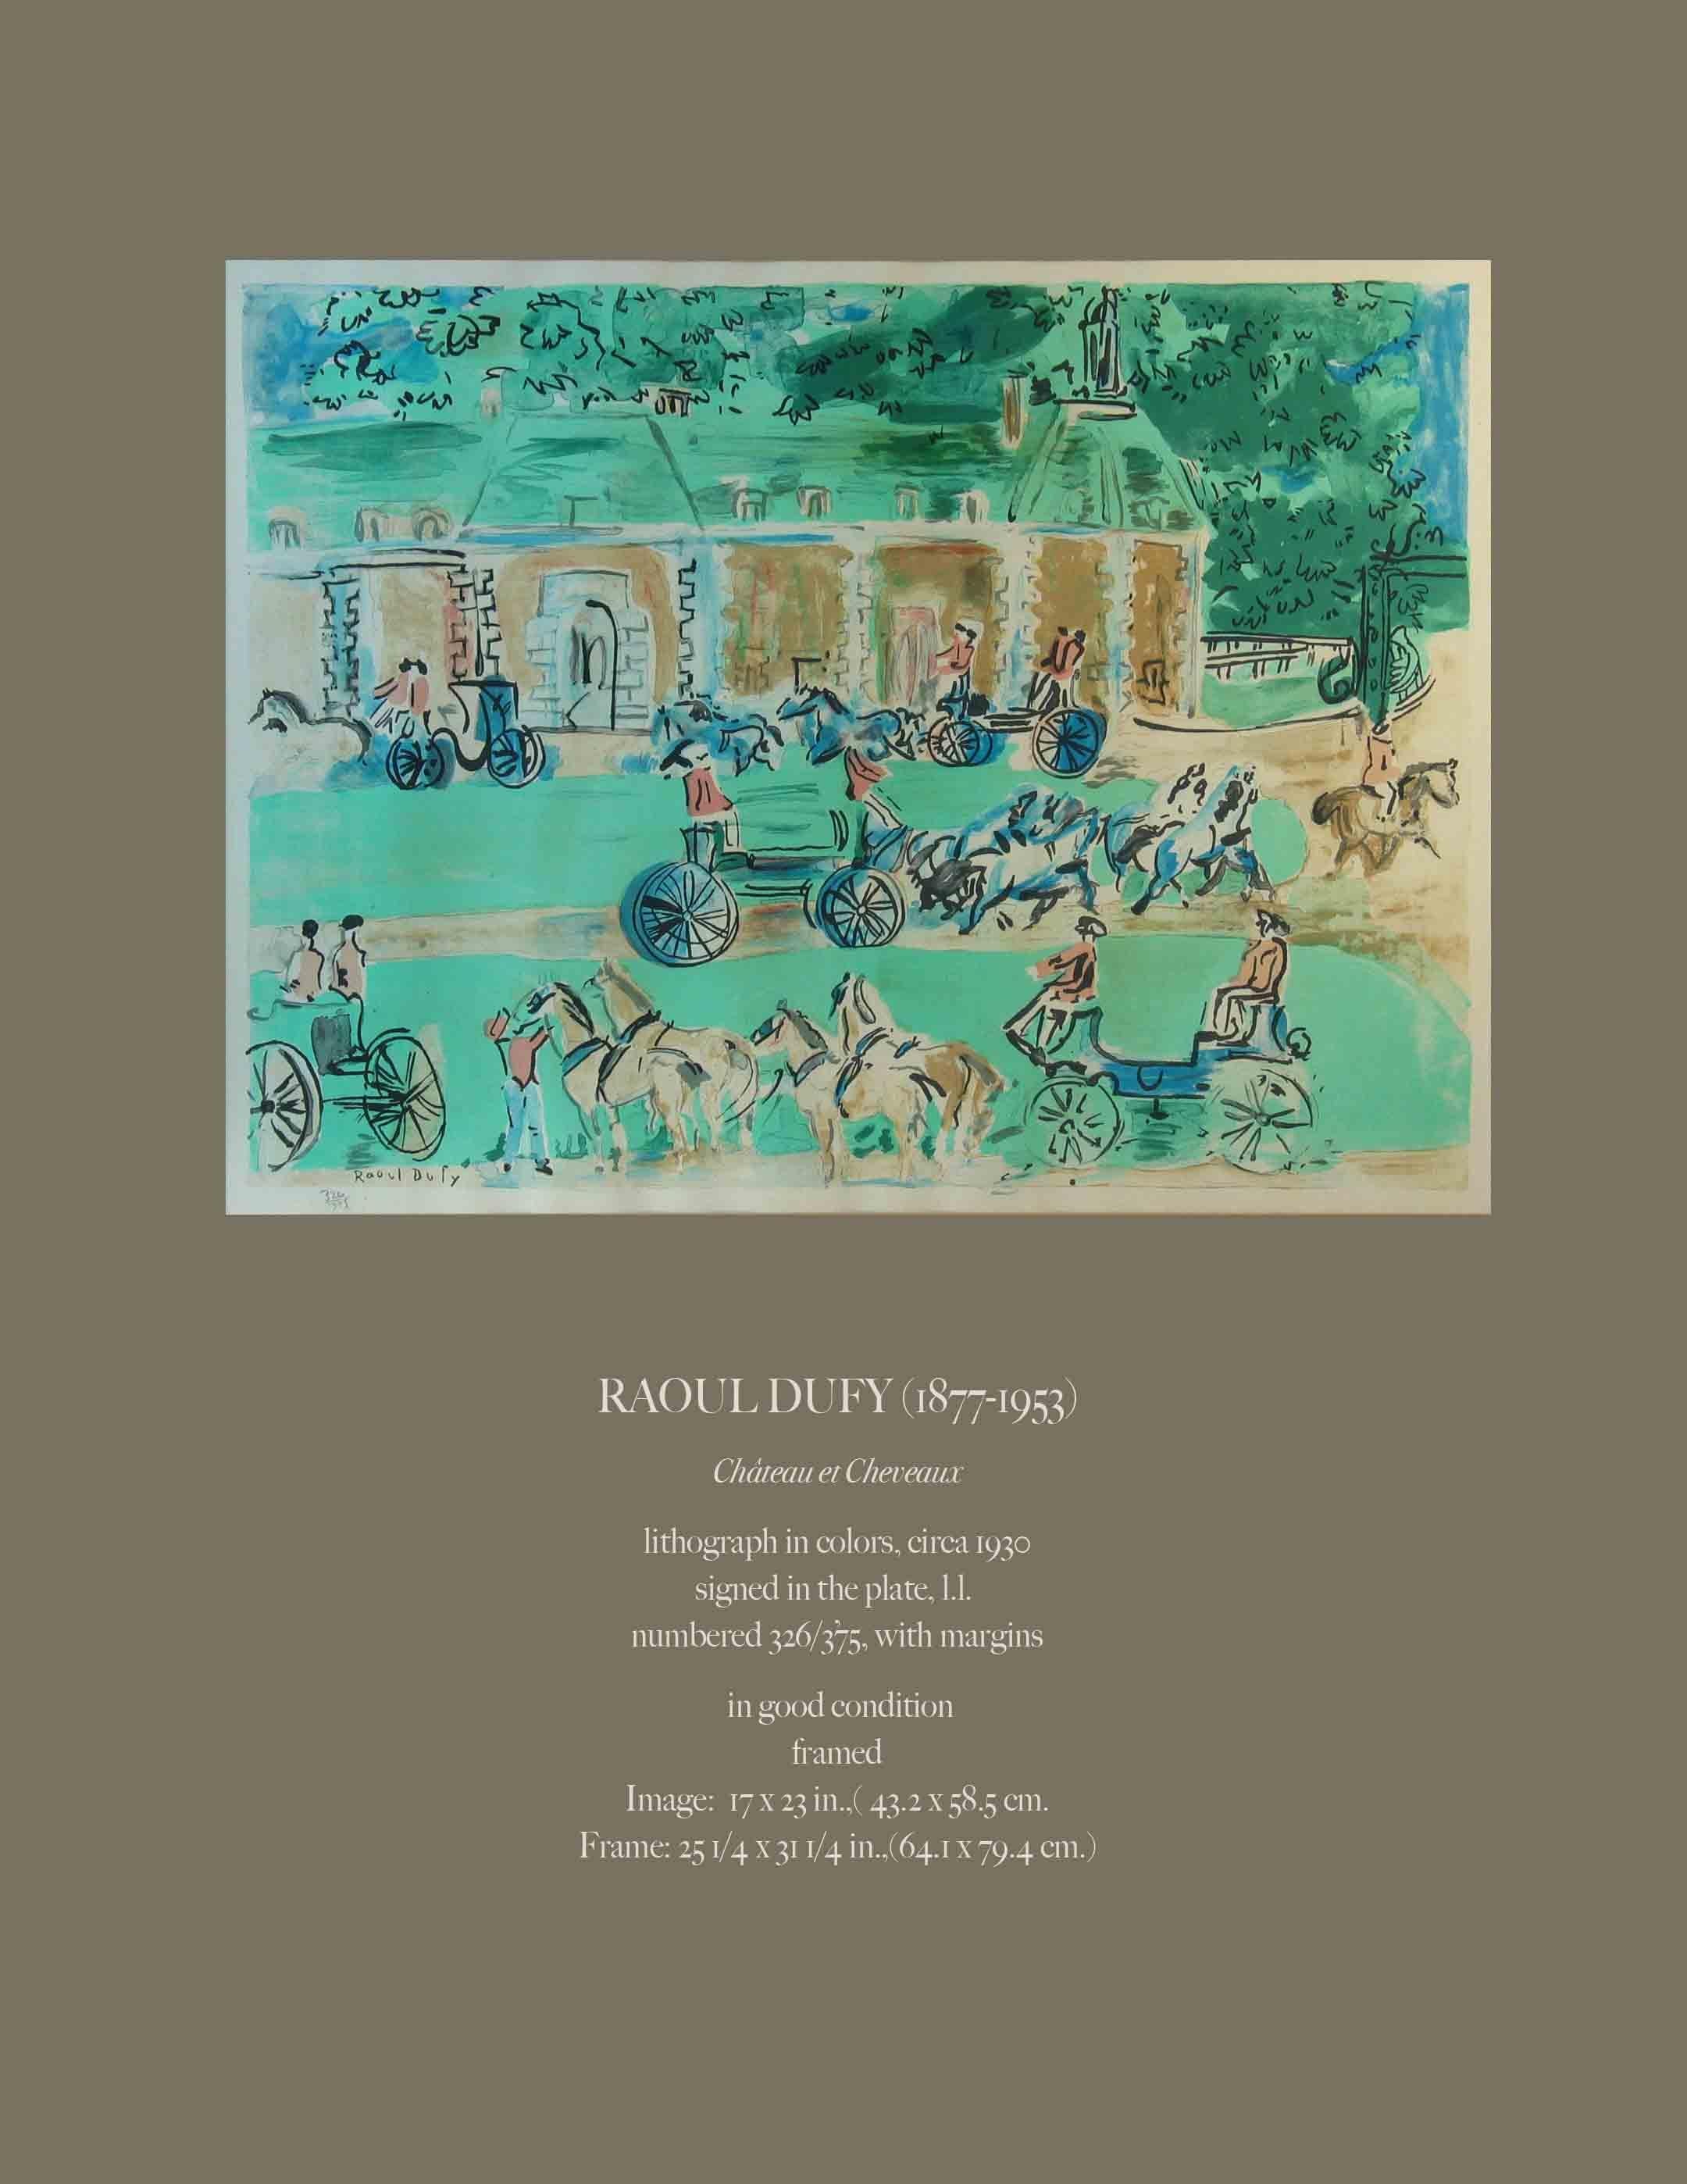 Raoul Dufy (1877-1953)


Château et Cheveaux.


Lithograph in colors, circa 1930.

Signed in the plate, l.l. 
Numbered 326/375, with margins.


In good condition,
Framed.

Measures: Image 17 x 23 in., (43.2 x 58.5 cm.)

Frame 25 1/4